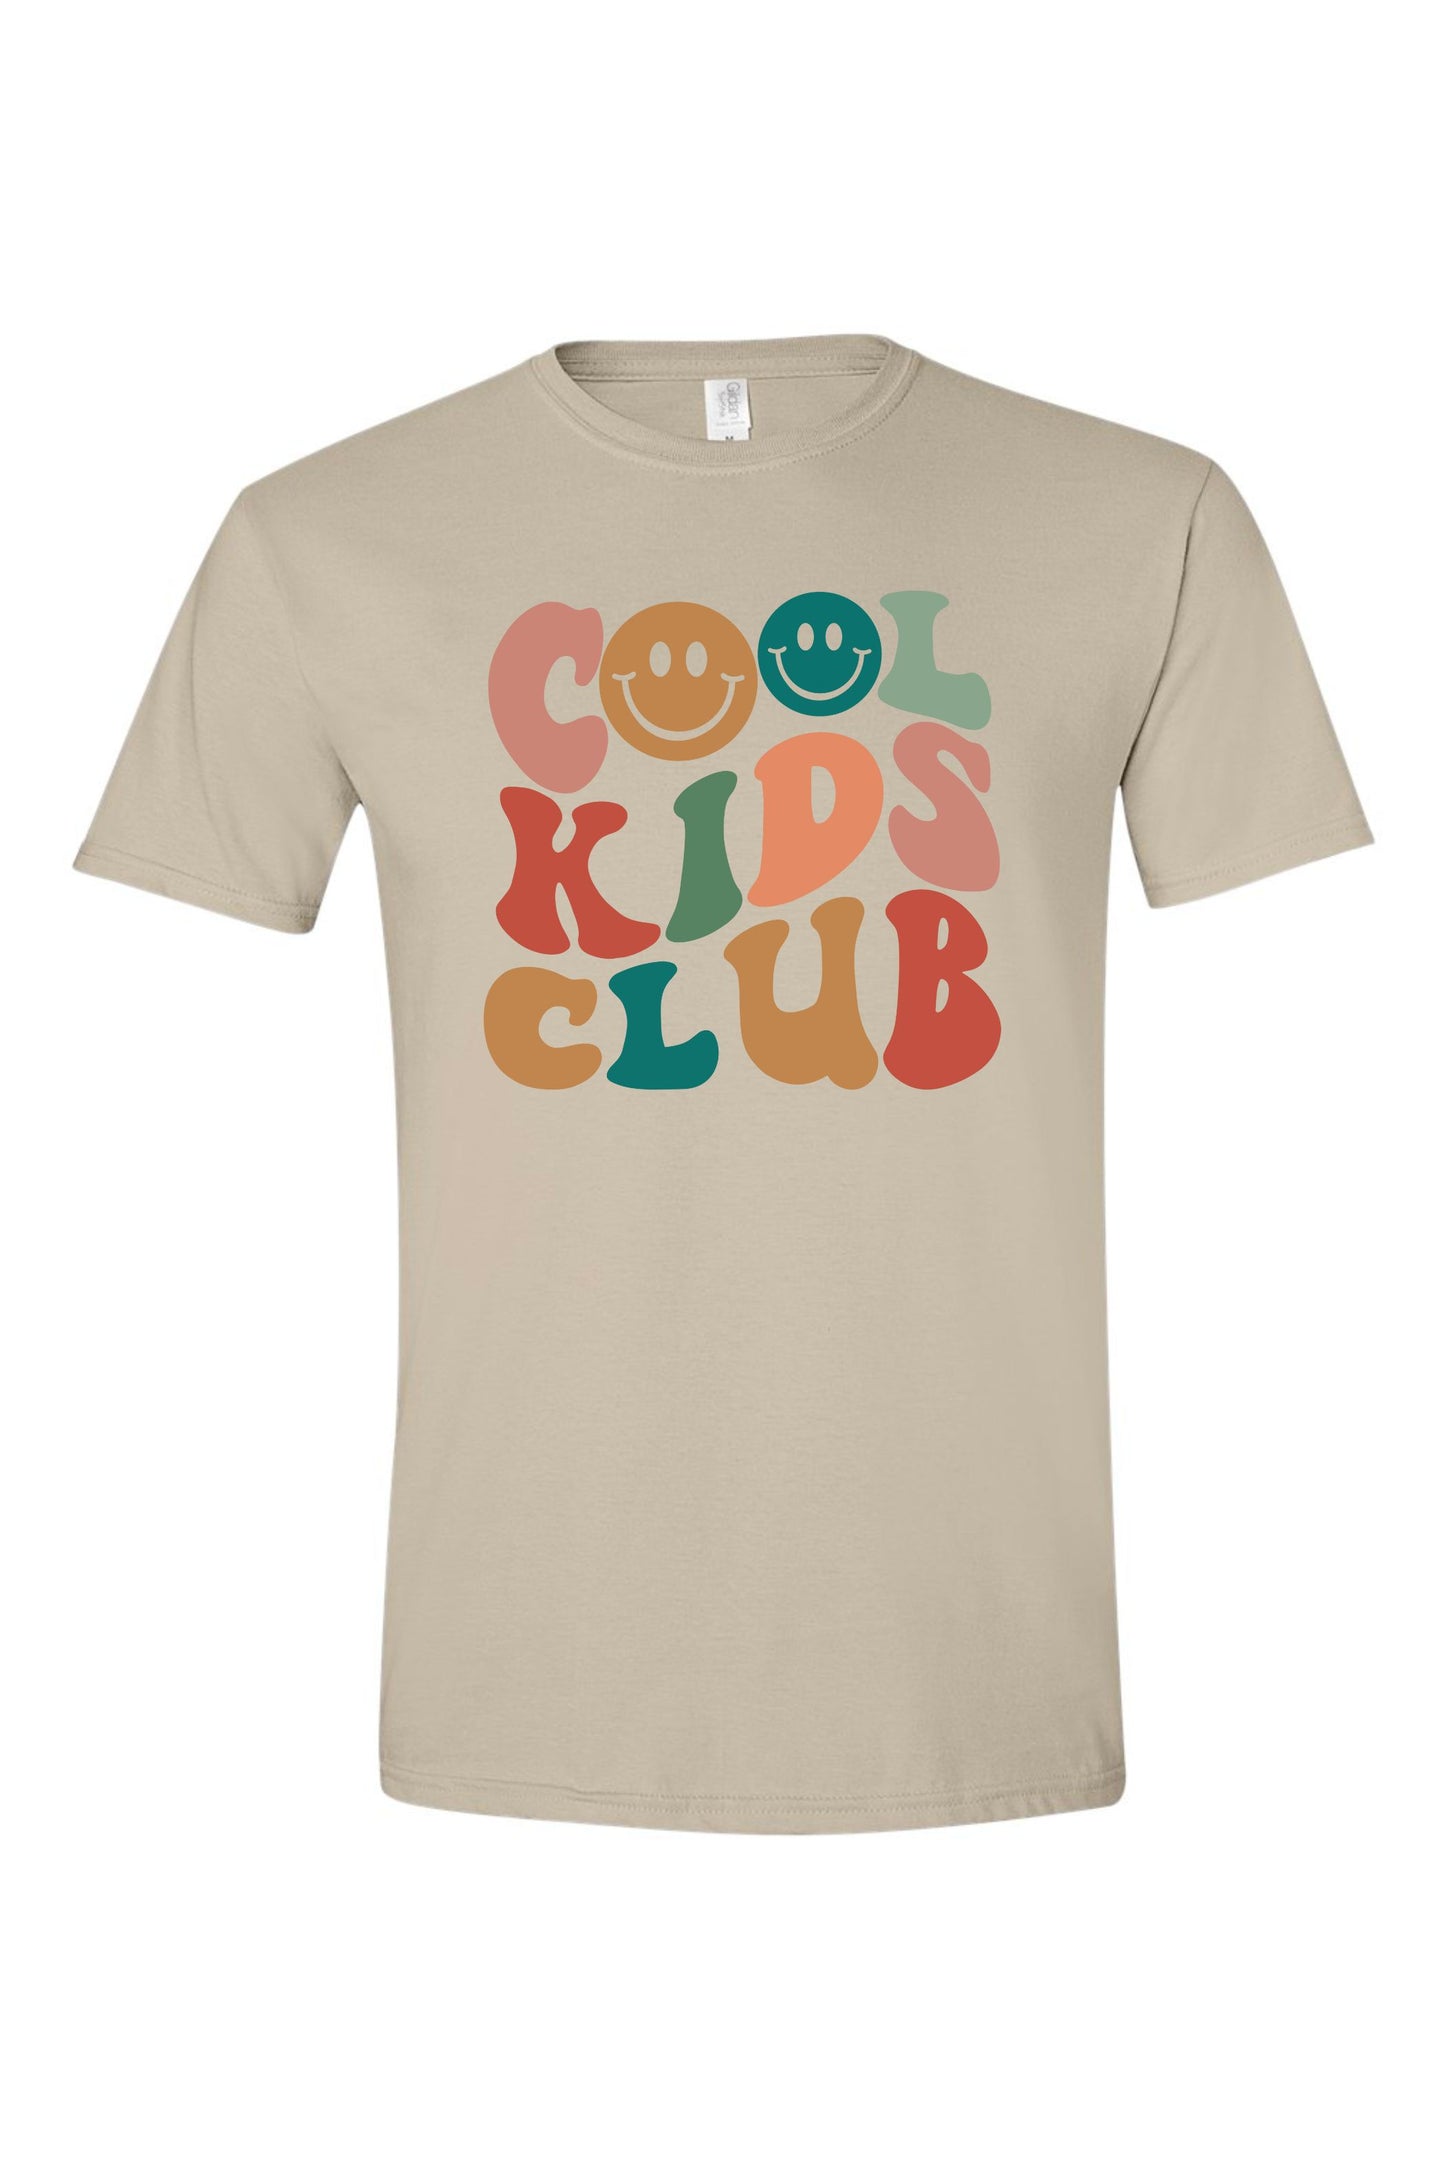 Kids Clubs - Kids Days Out